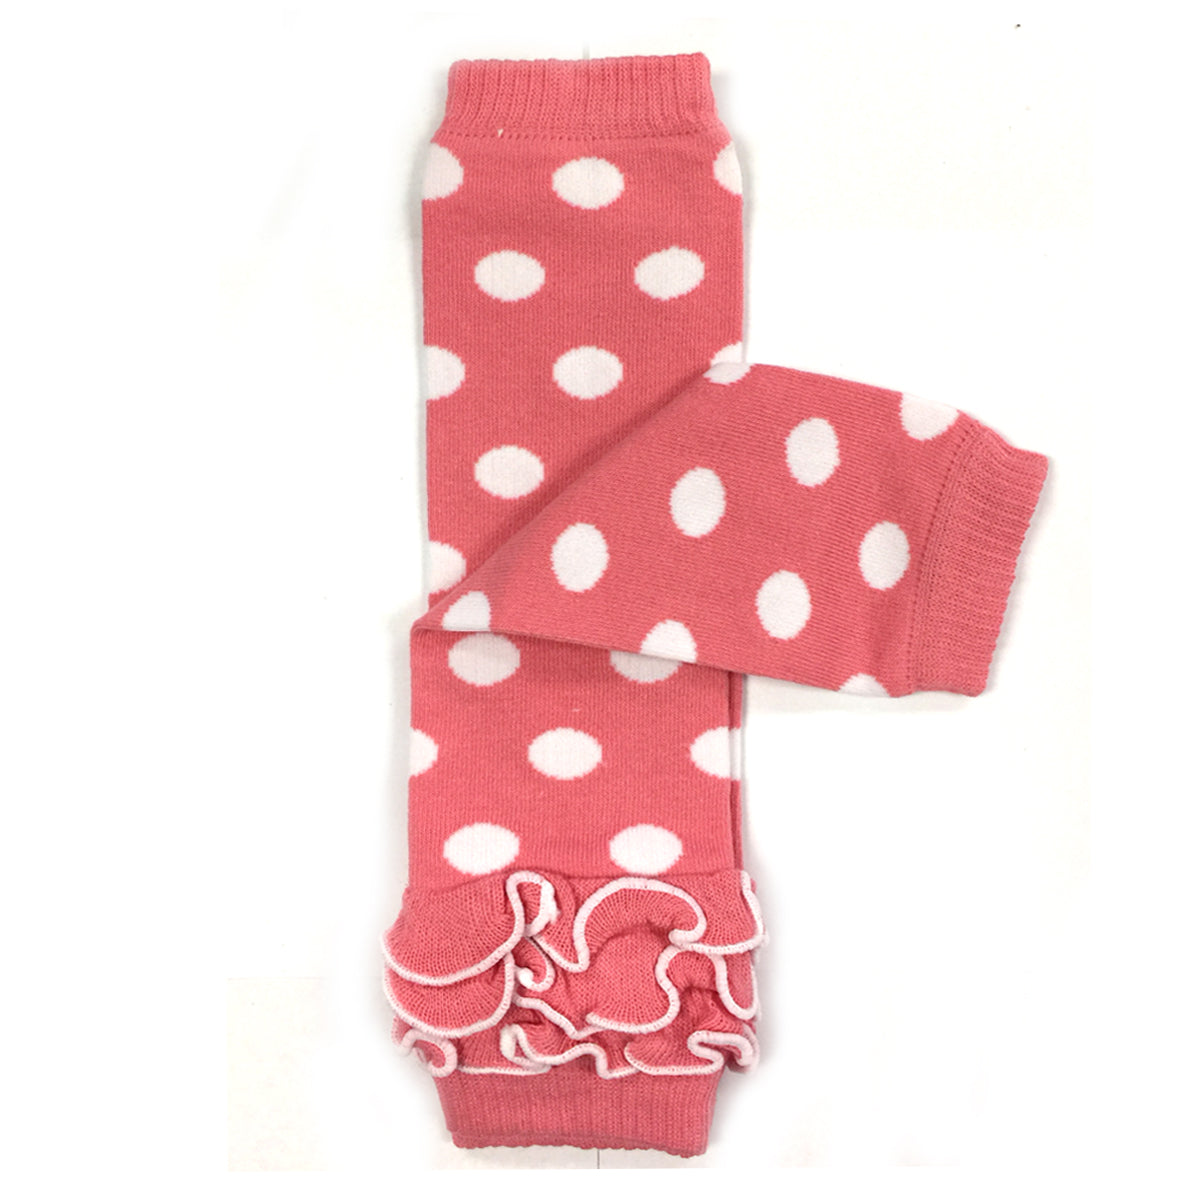 Wrapables Colorful Baby Leg Warmers Set of 4